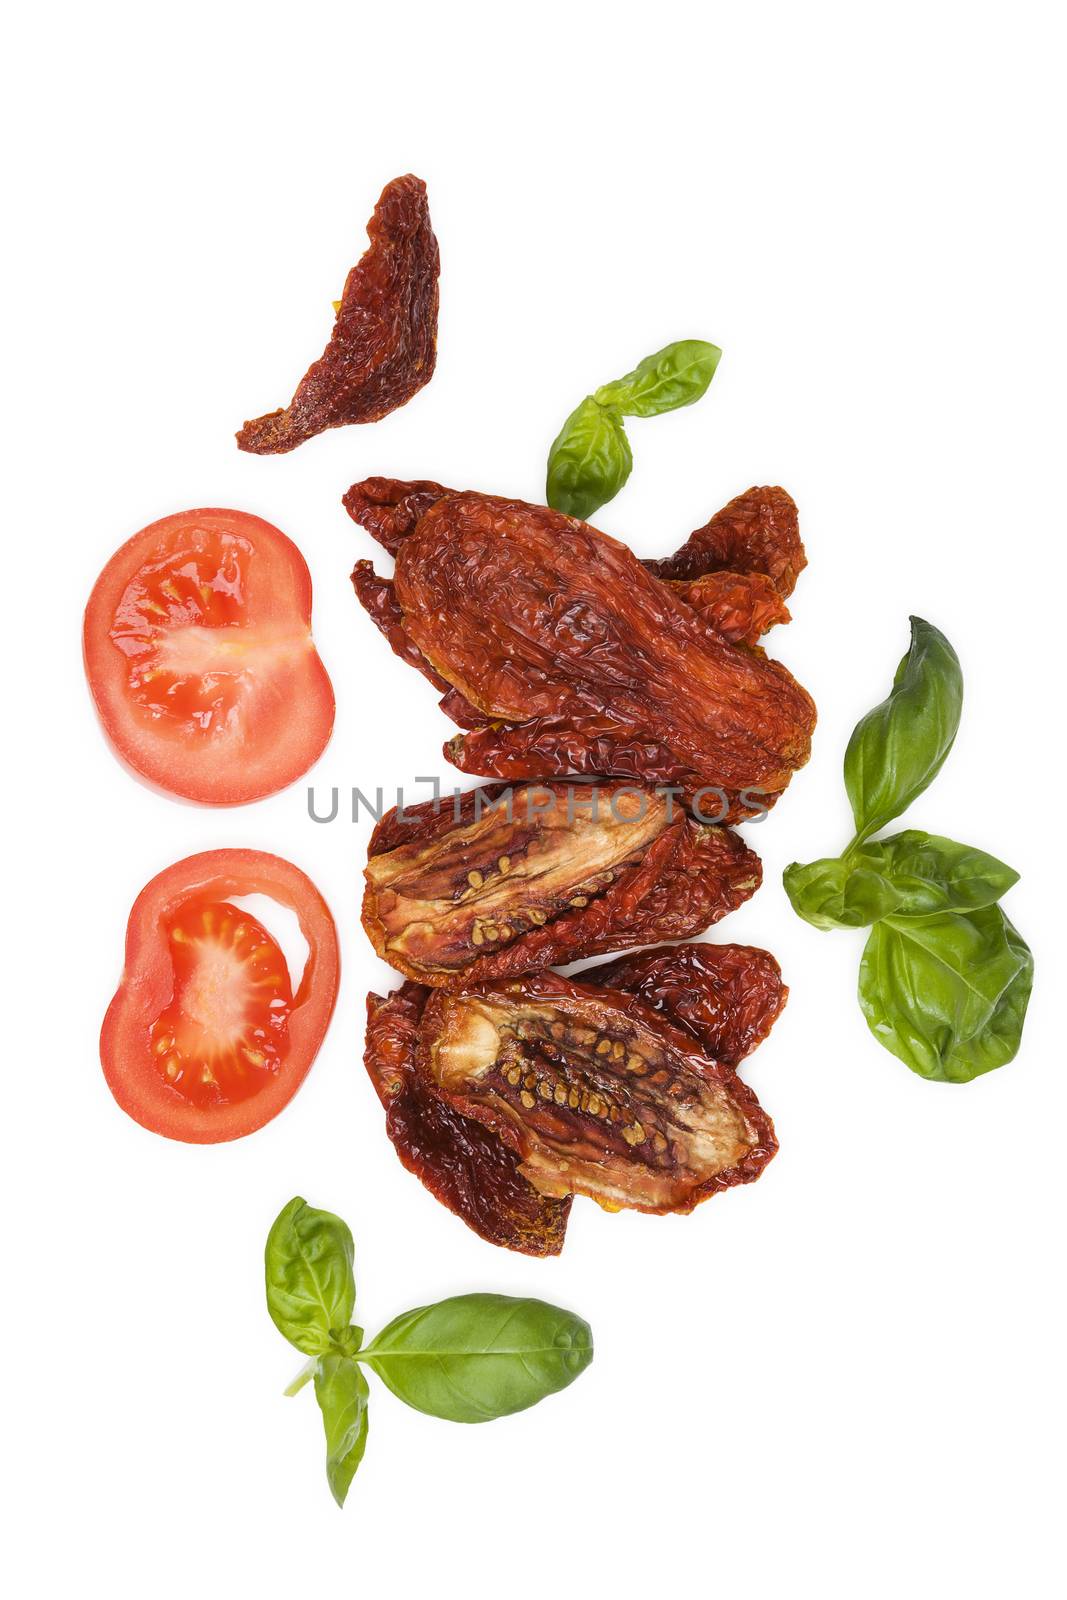 Sundried tomatos, fresh tomatoes and fresh basil herbs isolated on white background, top view. Culinary italian eating.